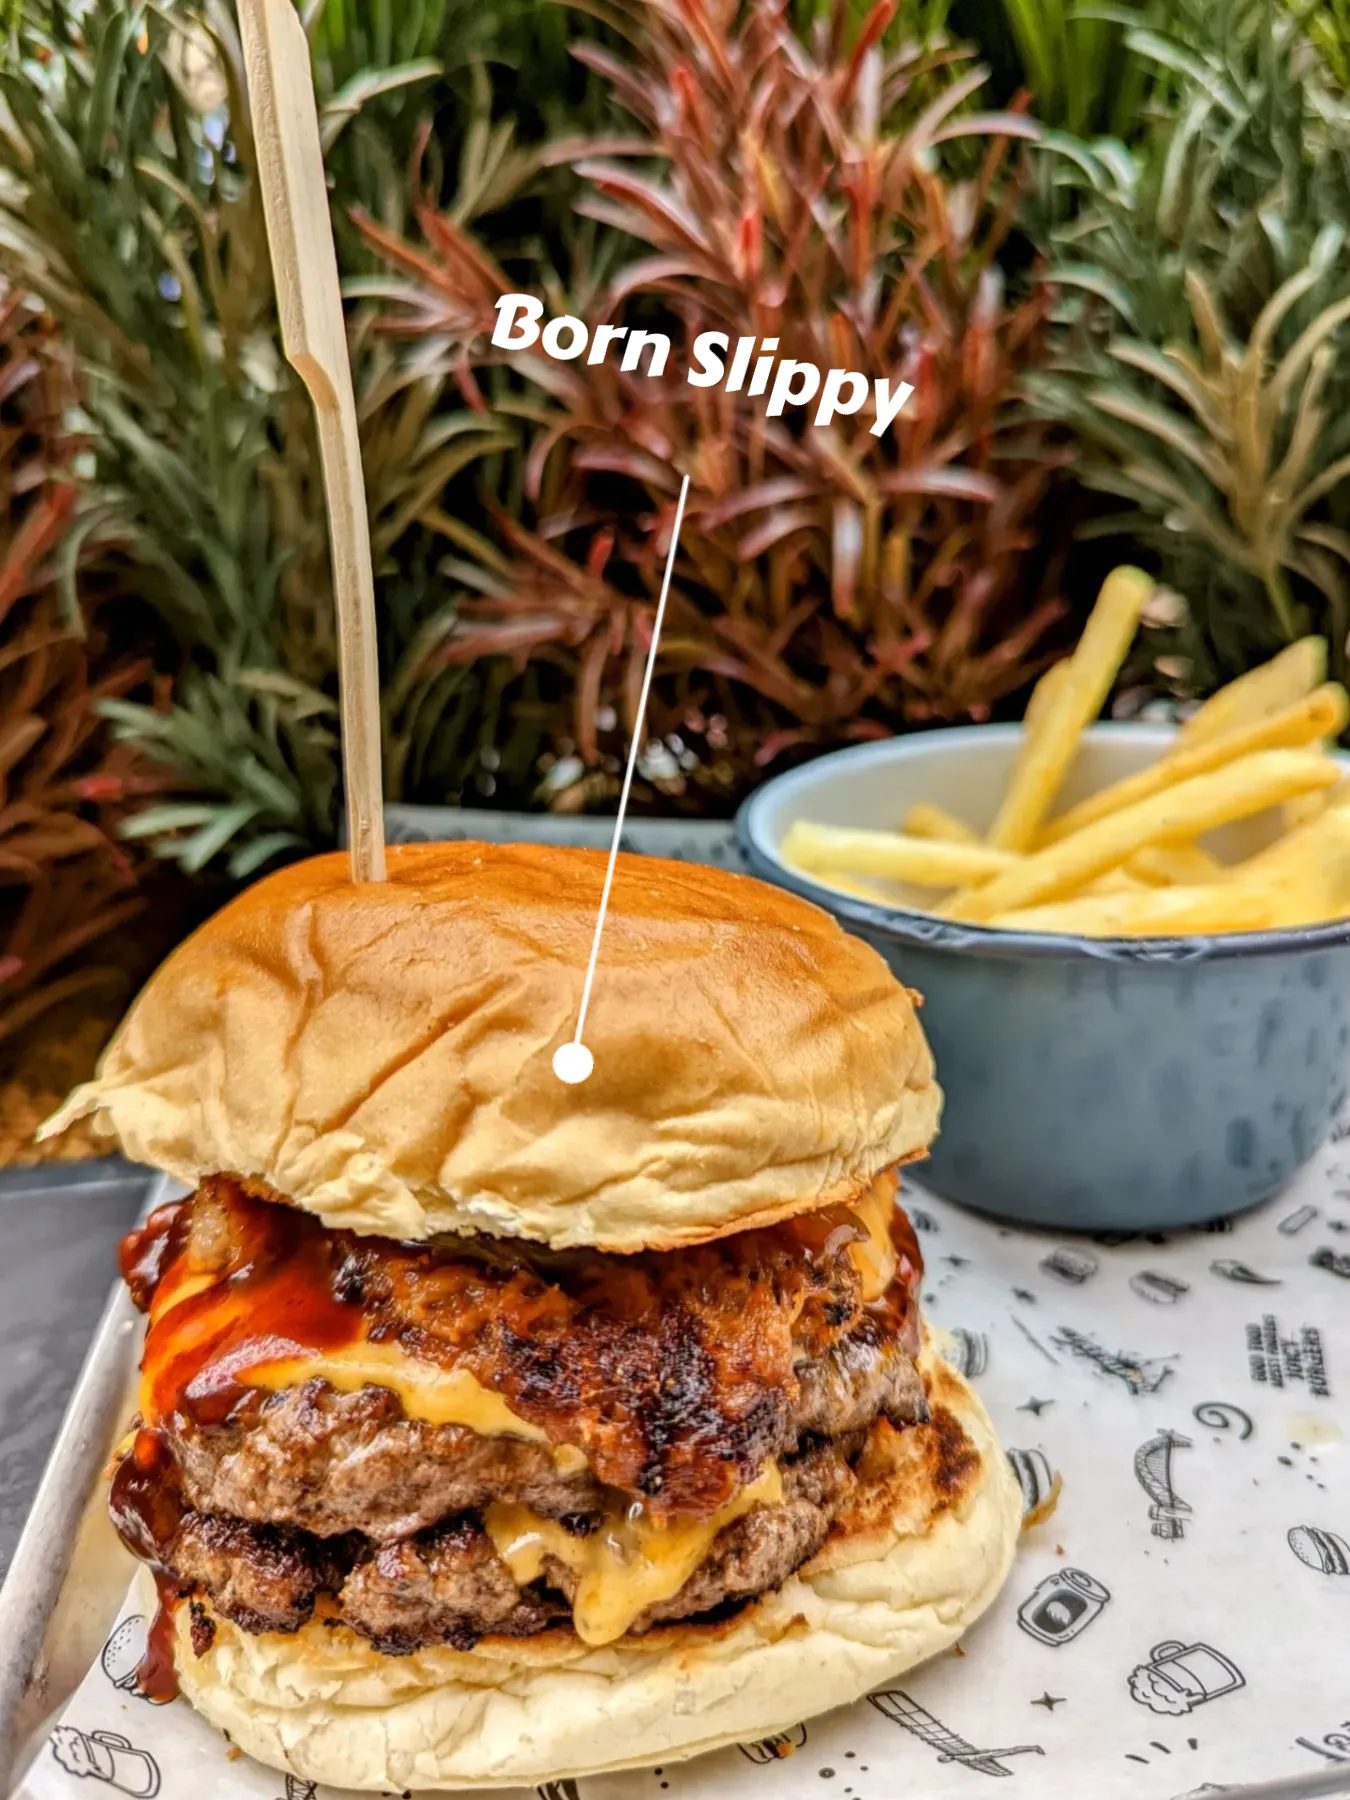 IT'S HERE!!! Our signature 'Smokeshow' Burger is now available at